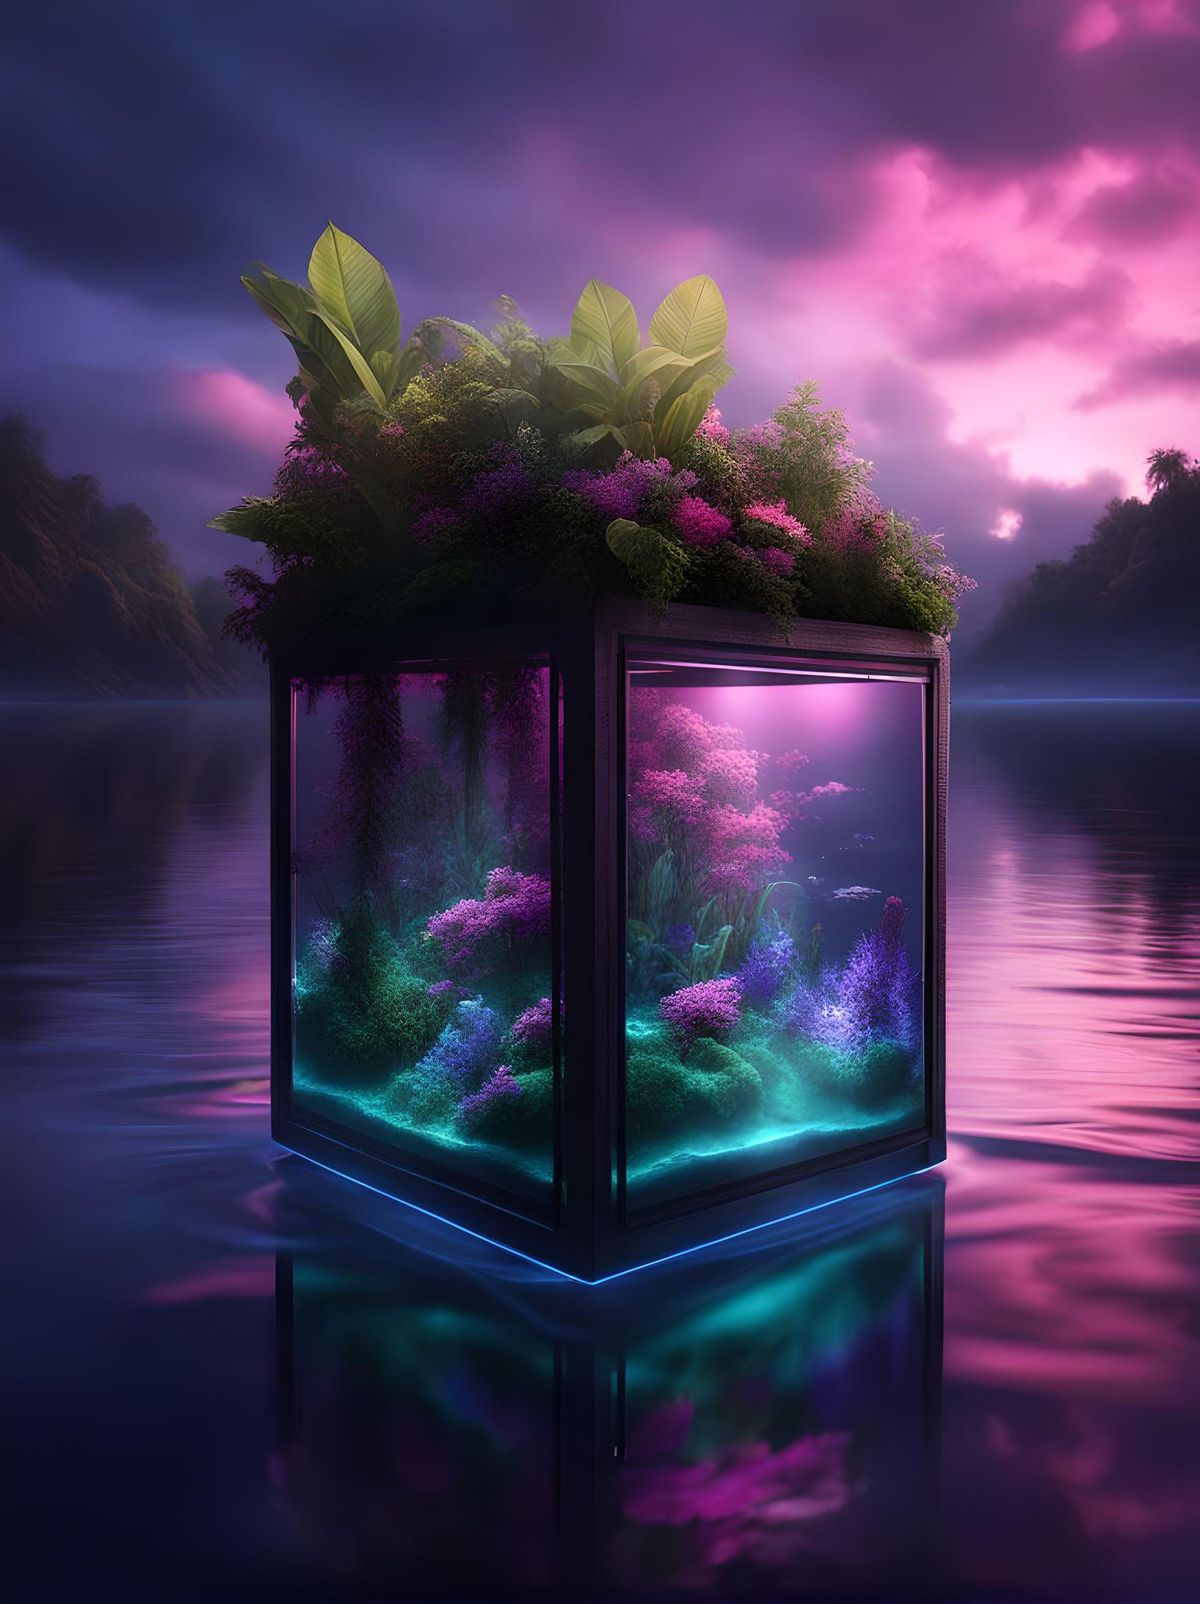 Witness the grandeur of a square box made of glass, pink purple and green plants are inside the box, water and a small ship is also inside the box, box is placed on a rock, trees and flowers, clouds on the sky, intricate details, hyperrealistic photography, 8k, neon lights, nighttime, ultra dark theme